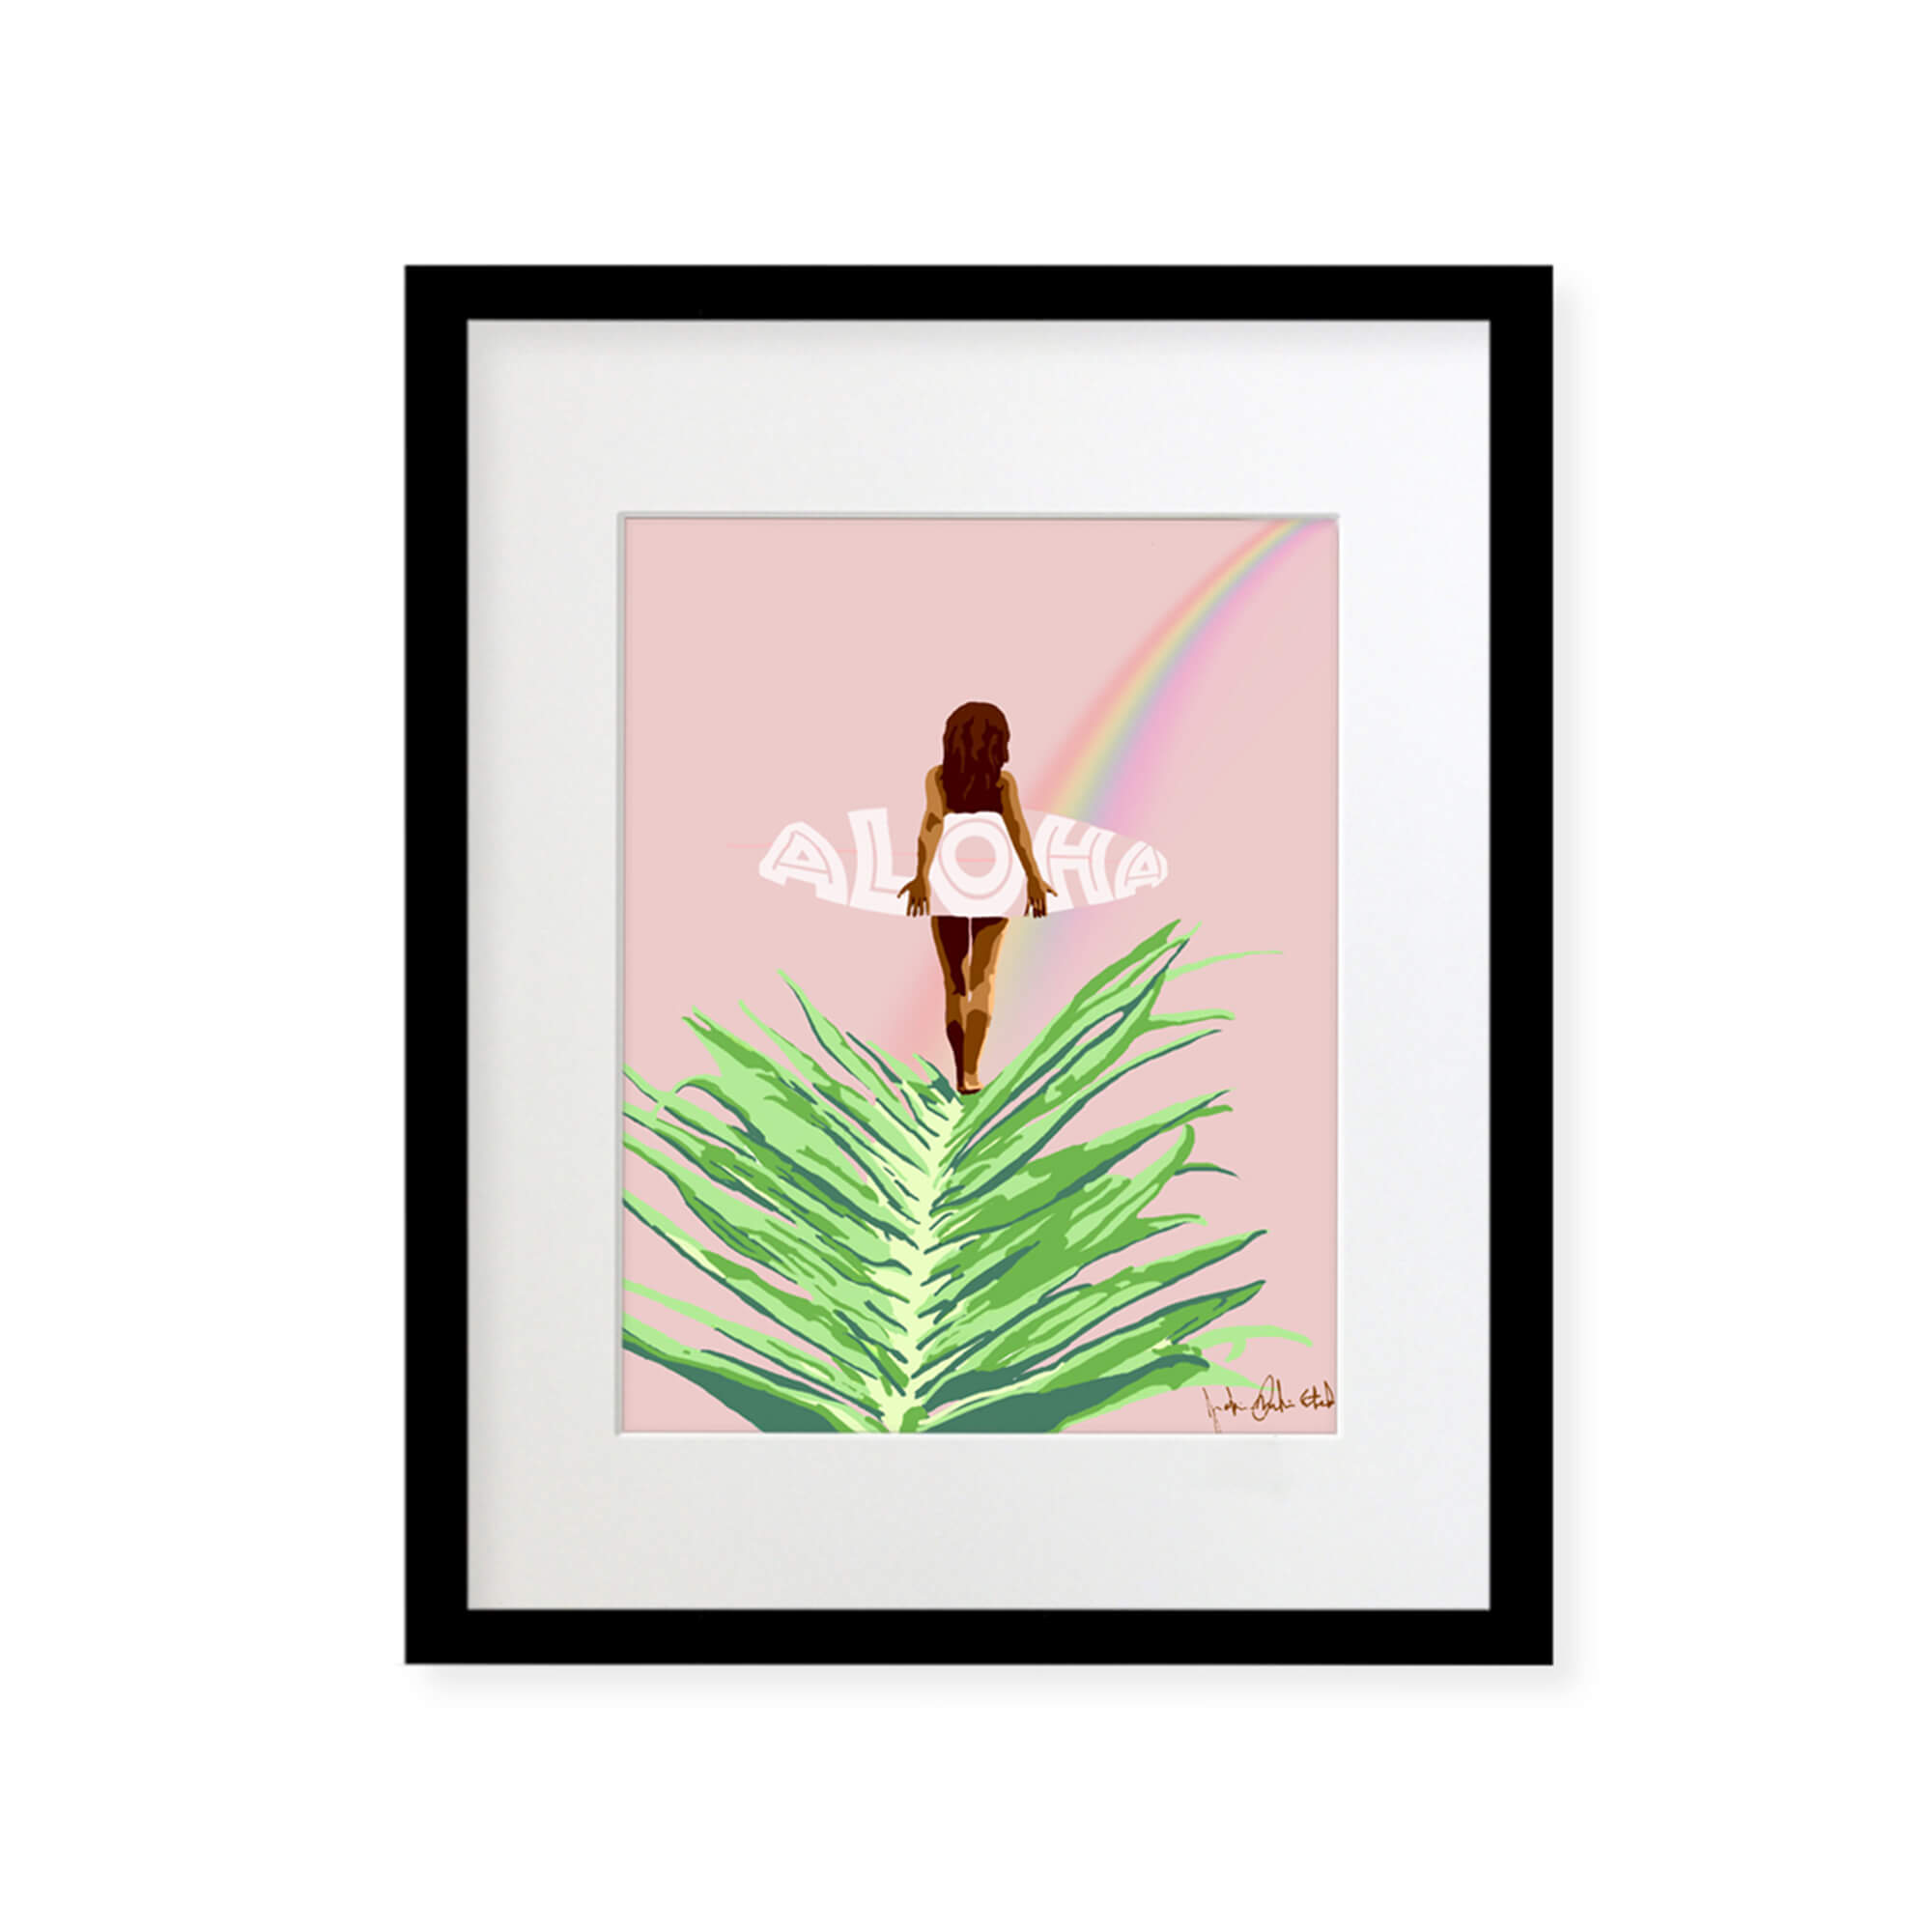 A framed matted art print featuring a woman holding a surfboard following a beautiful rainbow on a pastel pink background by Hawaii artist Jackie Eitel